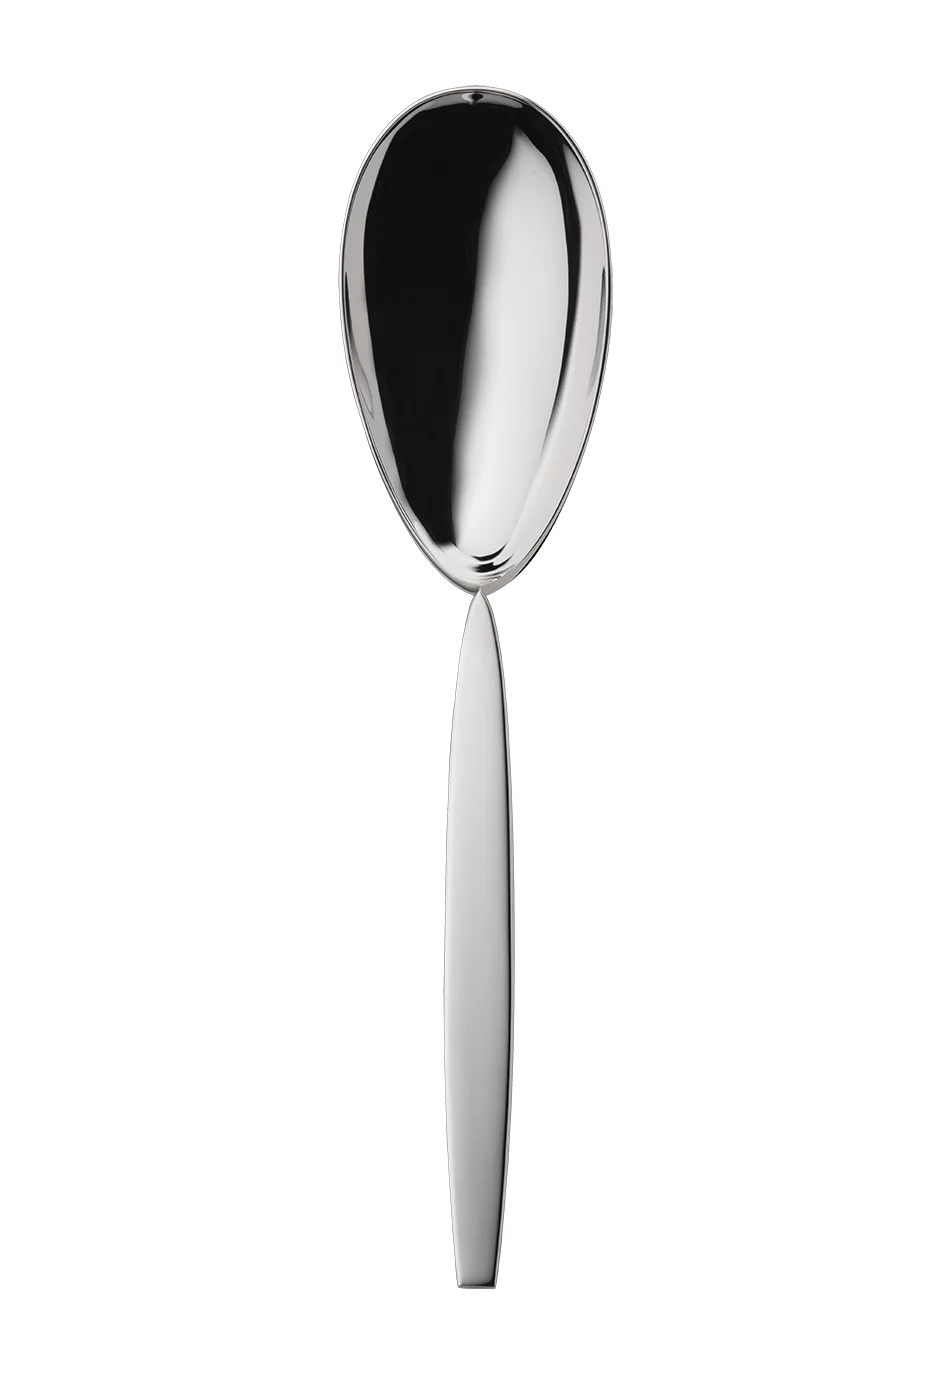 12" Serving Spoon (150g massive silverplated)